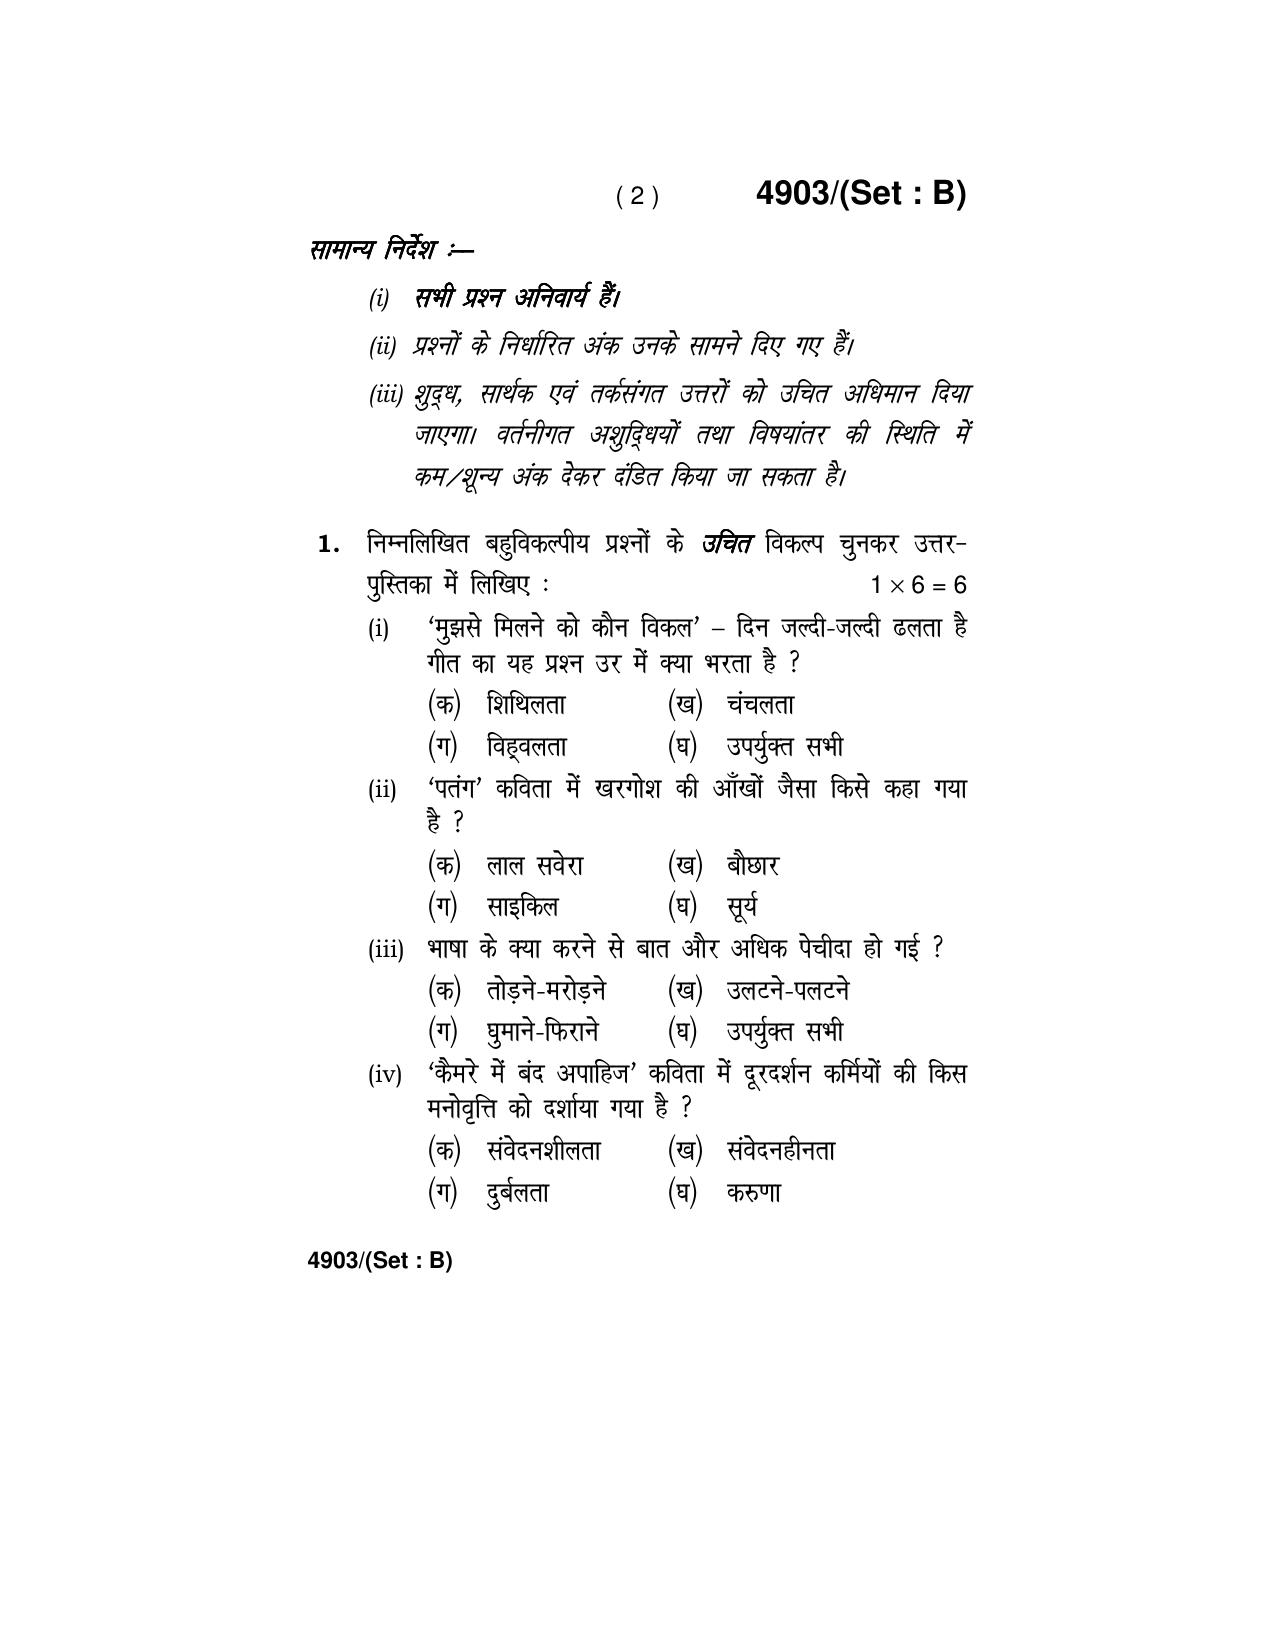 Haryana Board HBSE Class 12 Hindi Core 2020 Question Paper - Page 10